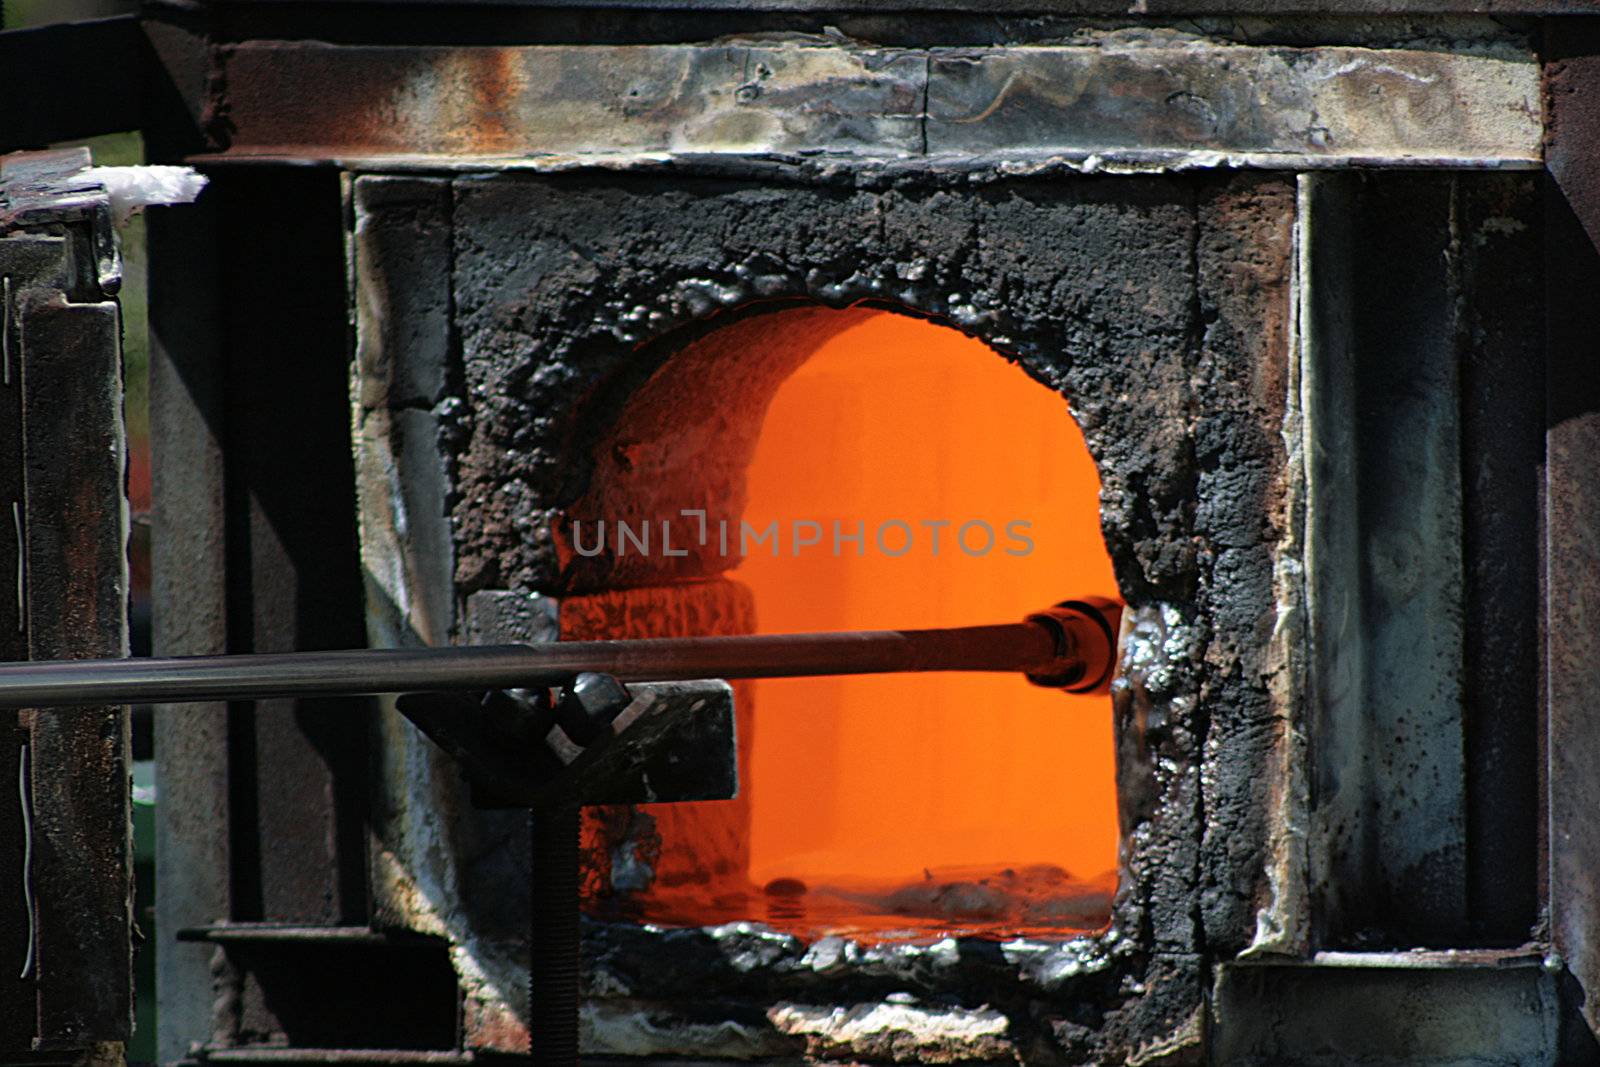 Glass-blower gets preparation from the furnace.